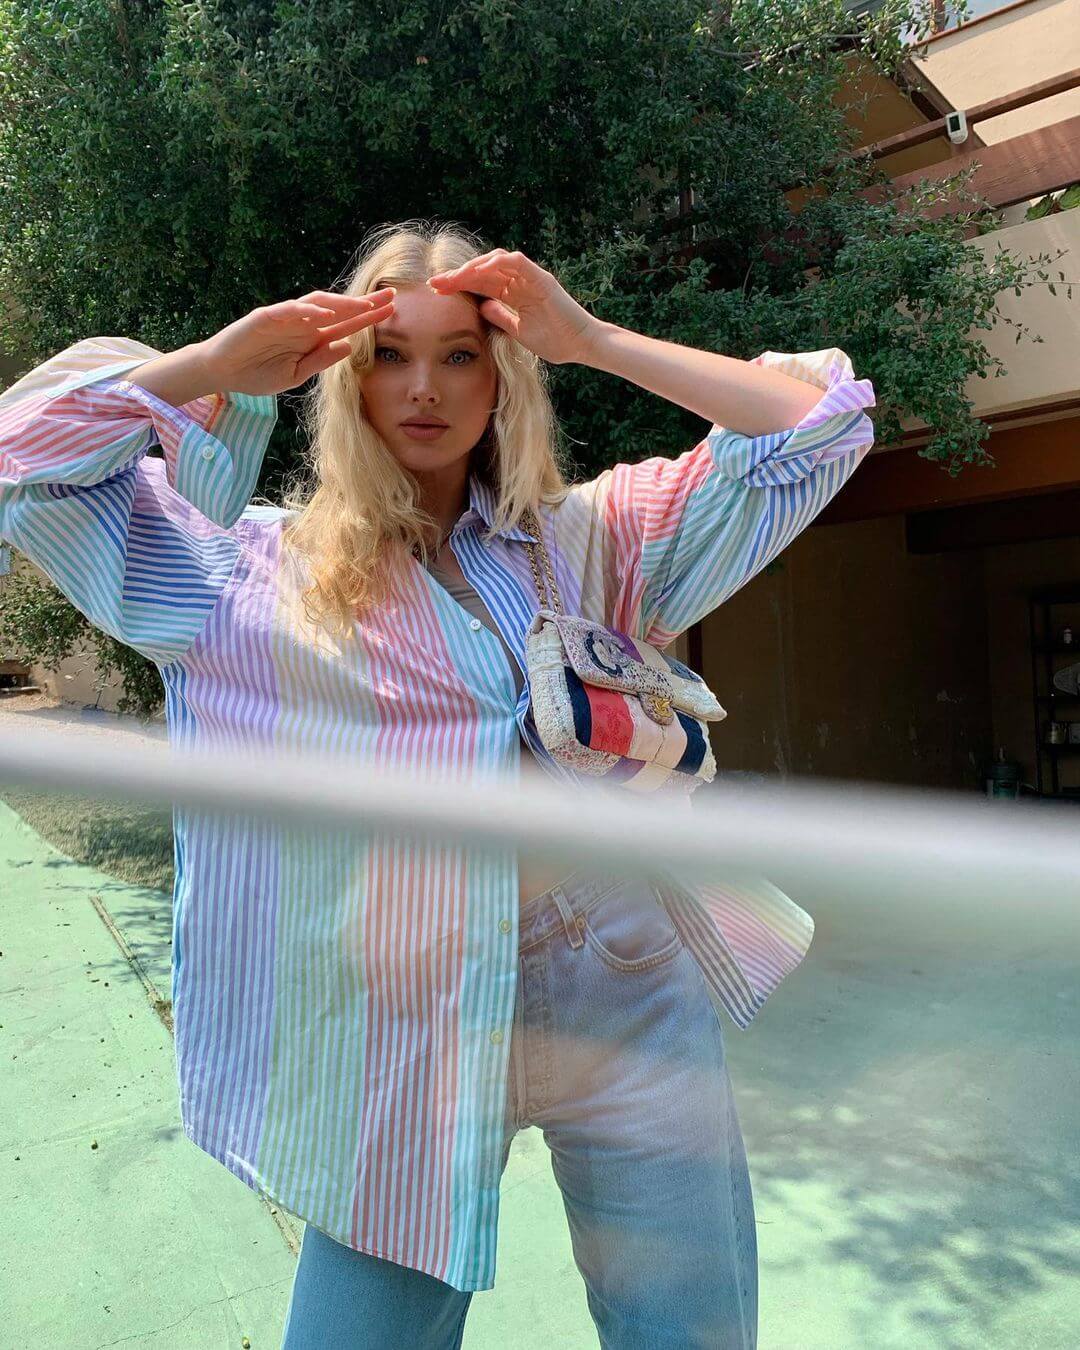 Fashion Inspiration To Take From Models Elsa Hosk - Oversized Shirts Are A Must Have